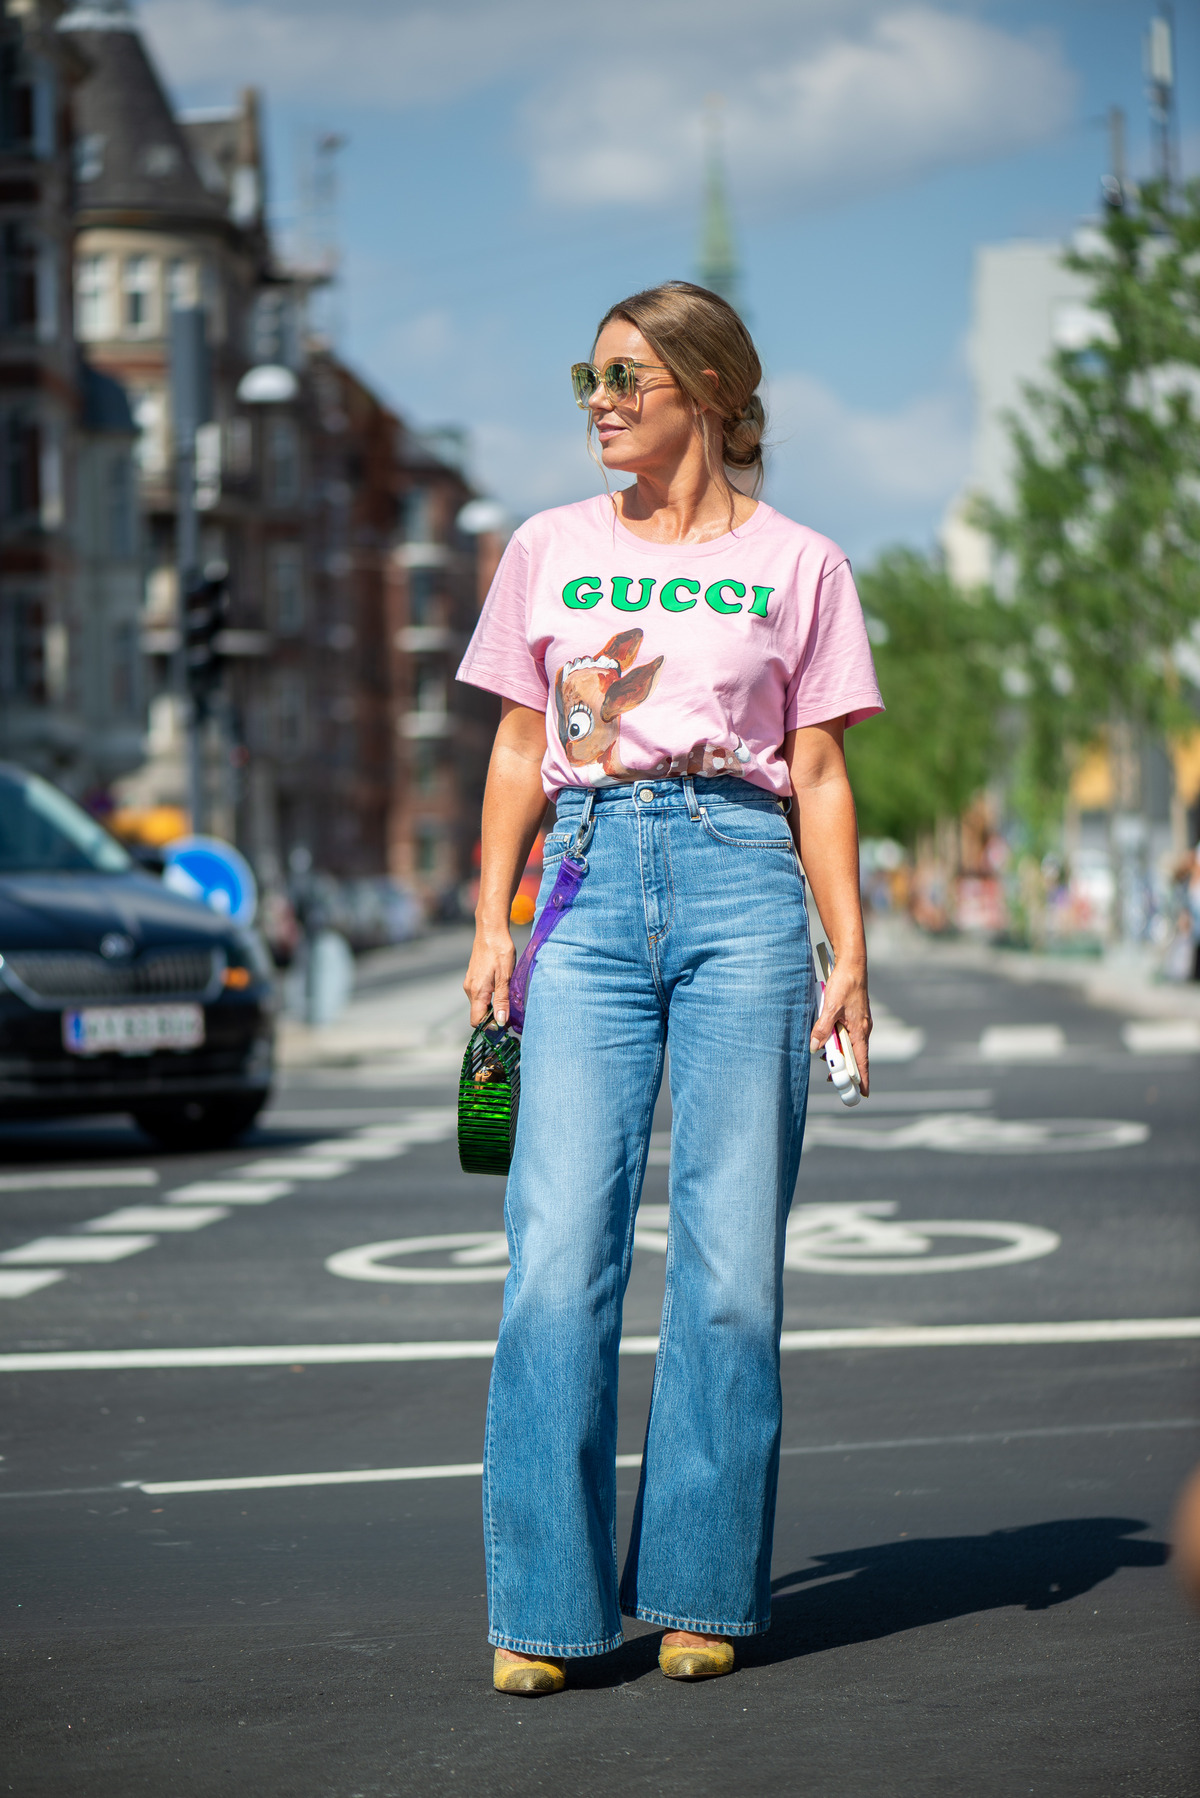 Top 61+ imagen gucci outfits for ladies - Giaoduchtn.edu.vn